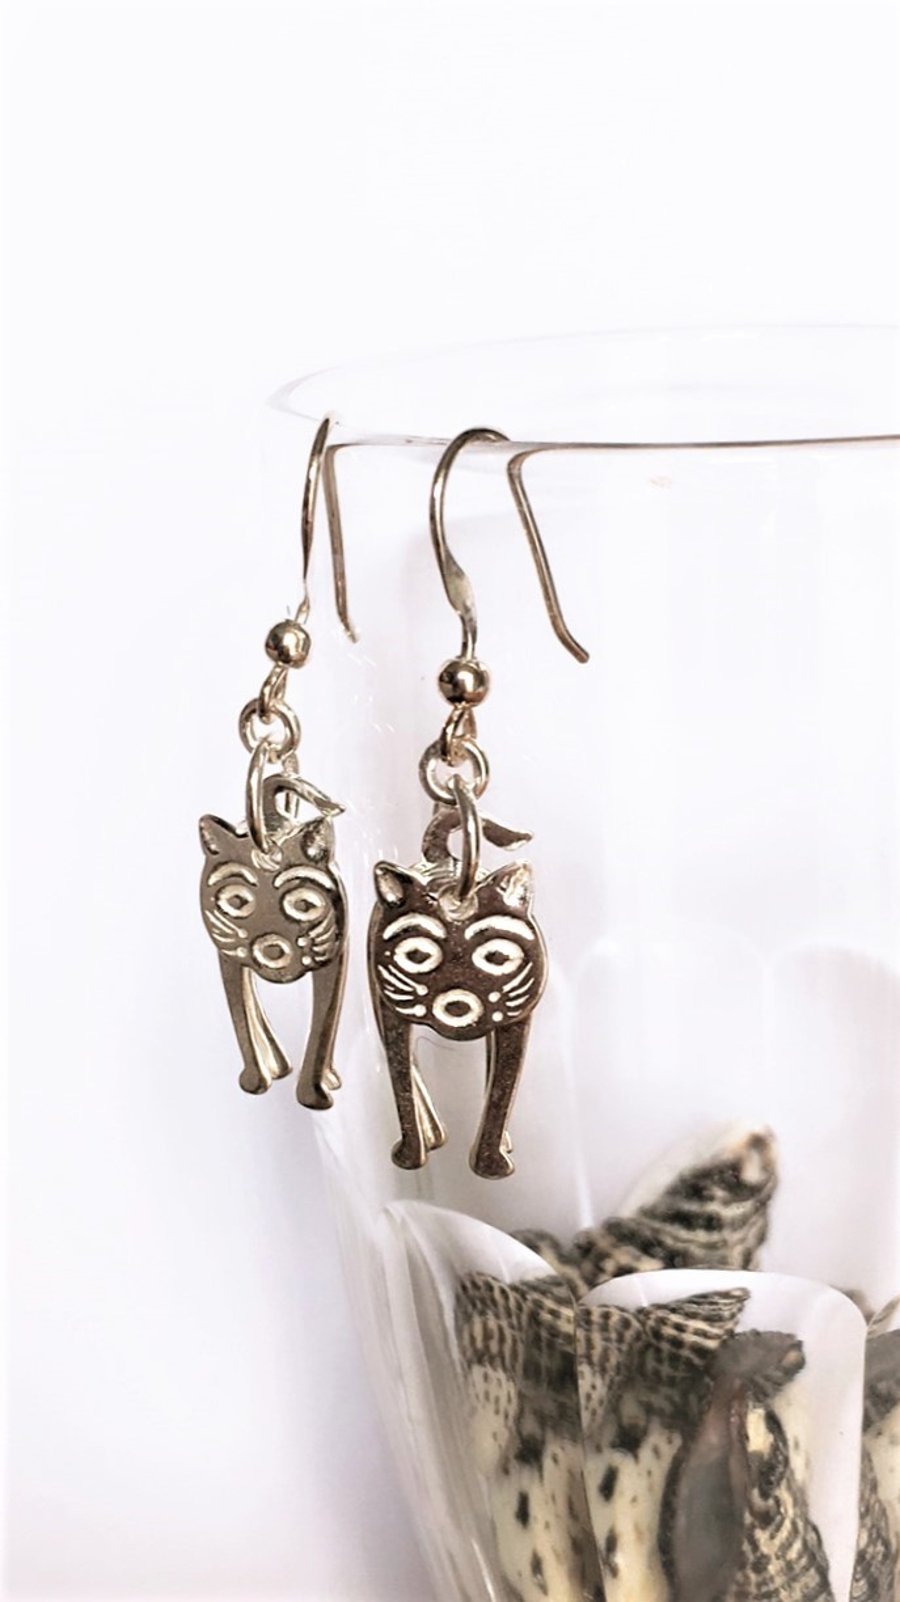 Gifts for CAT lovers - 925 sterling Silver hand cast Cat Design Earrings